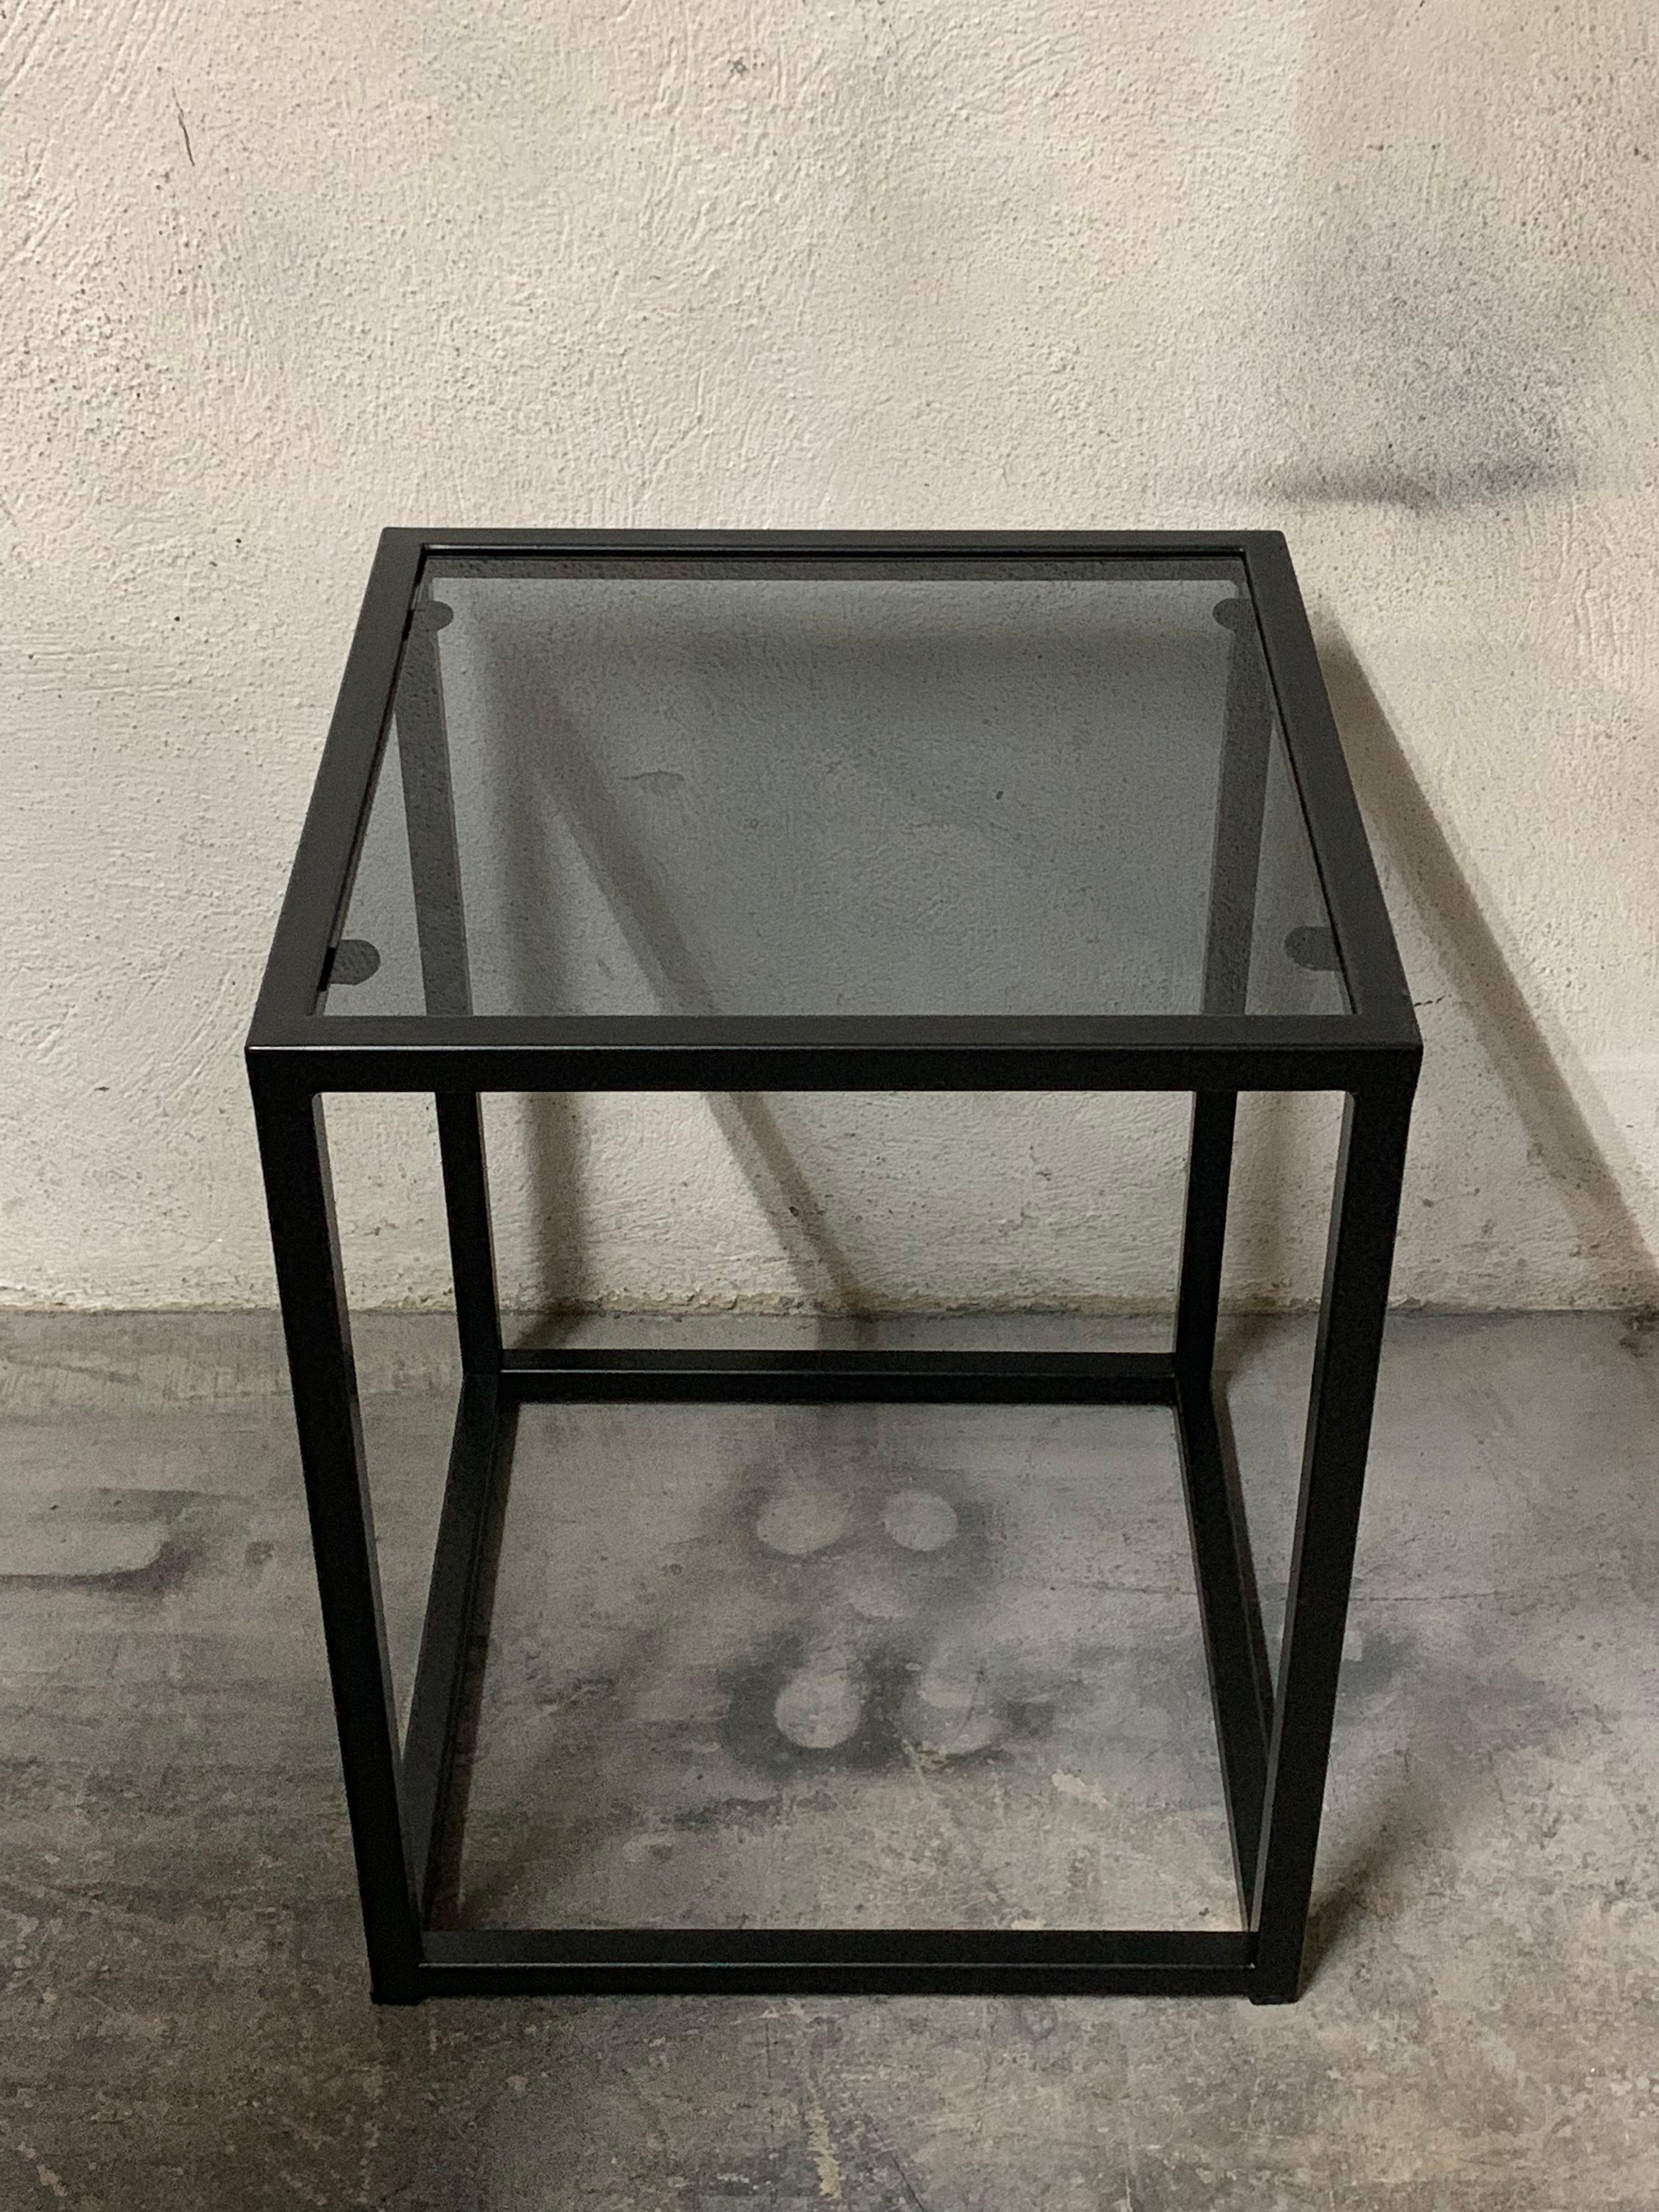 New Modern square black table with Fumee glass top. Indoor or outdoor
You can combine several tables for make a different compositions.